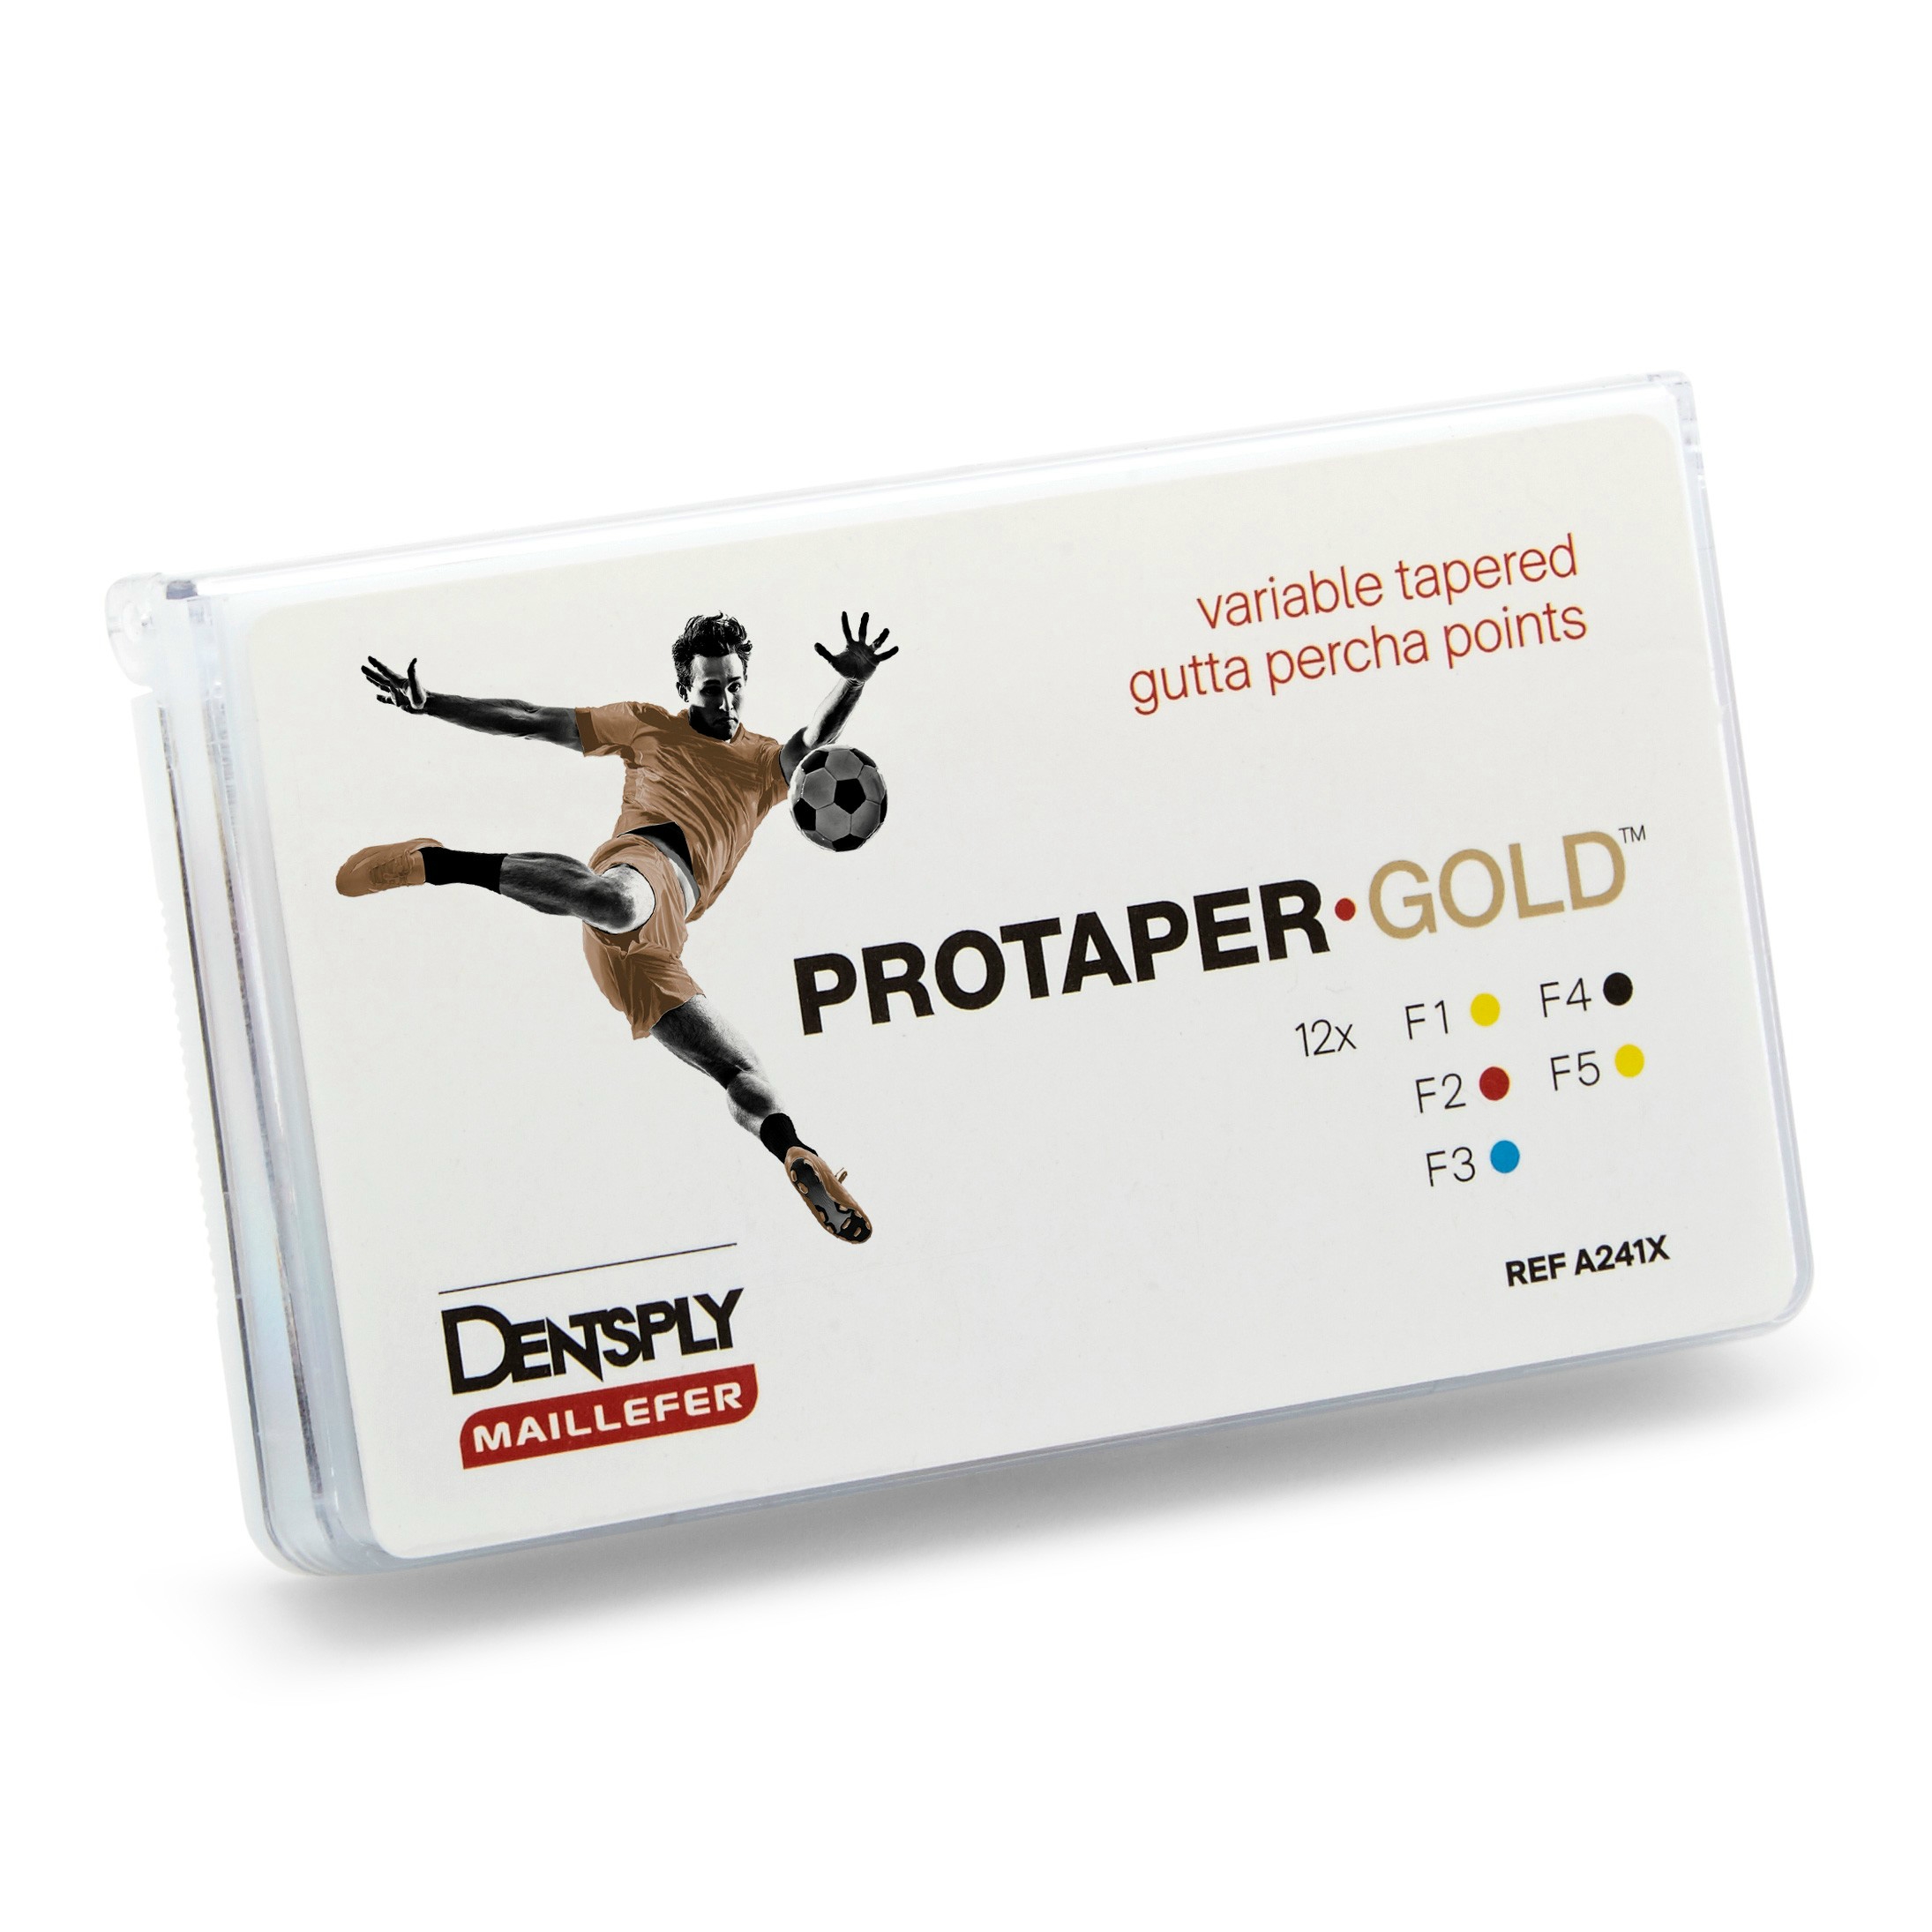 Protaper gold paper point F3